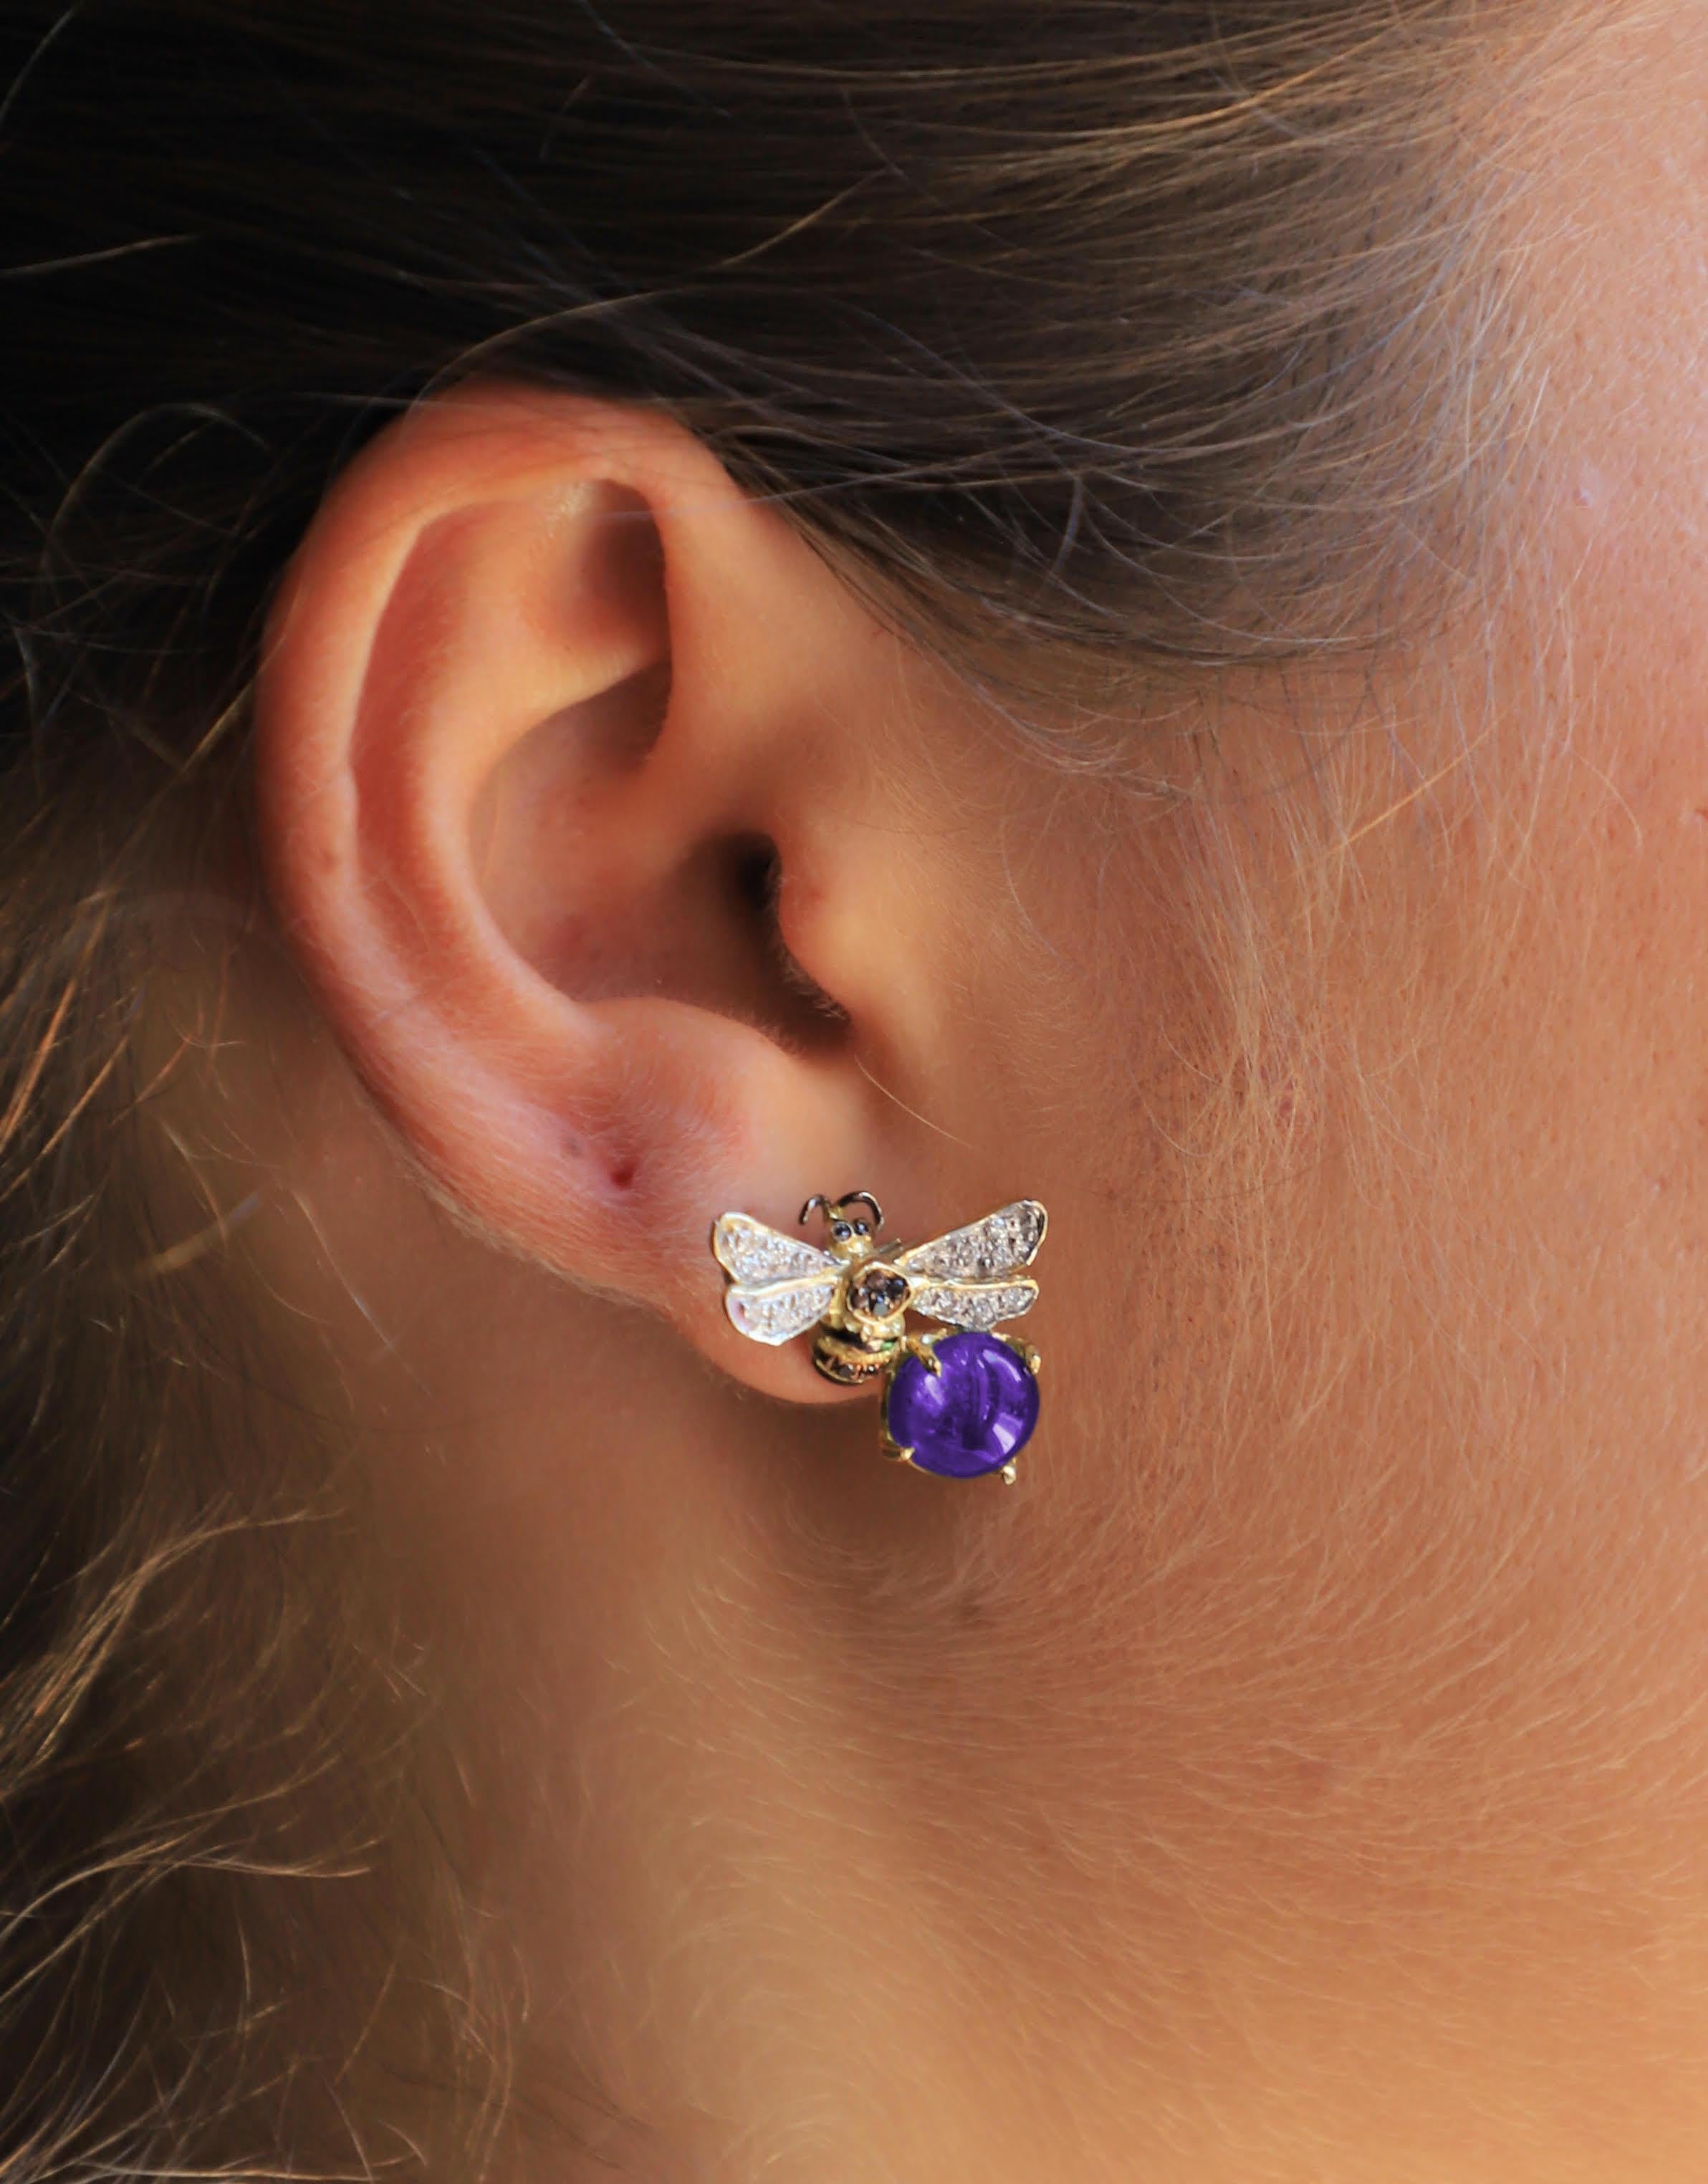 Rossella Ugolini Bees Collection, A beautiful pair of Bees Stud Earrings handcrafted in 18 Karats Yellow Gold and adorned with a deep violet amethyst, white and black diamonds.  
Dimensions: 0.78 in. (2 cm) x 0.78 in. (2 cm) x 0.23 in. (0.6 mm) .